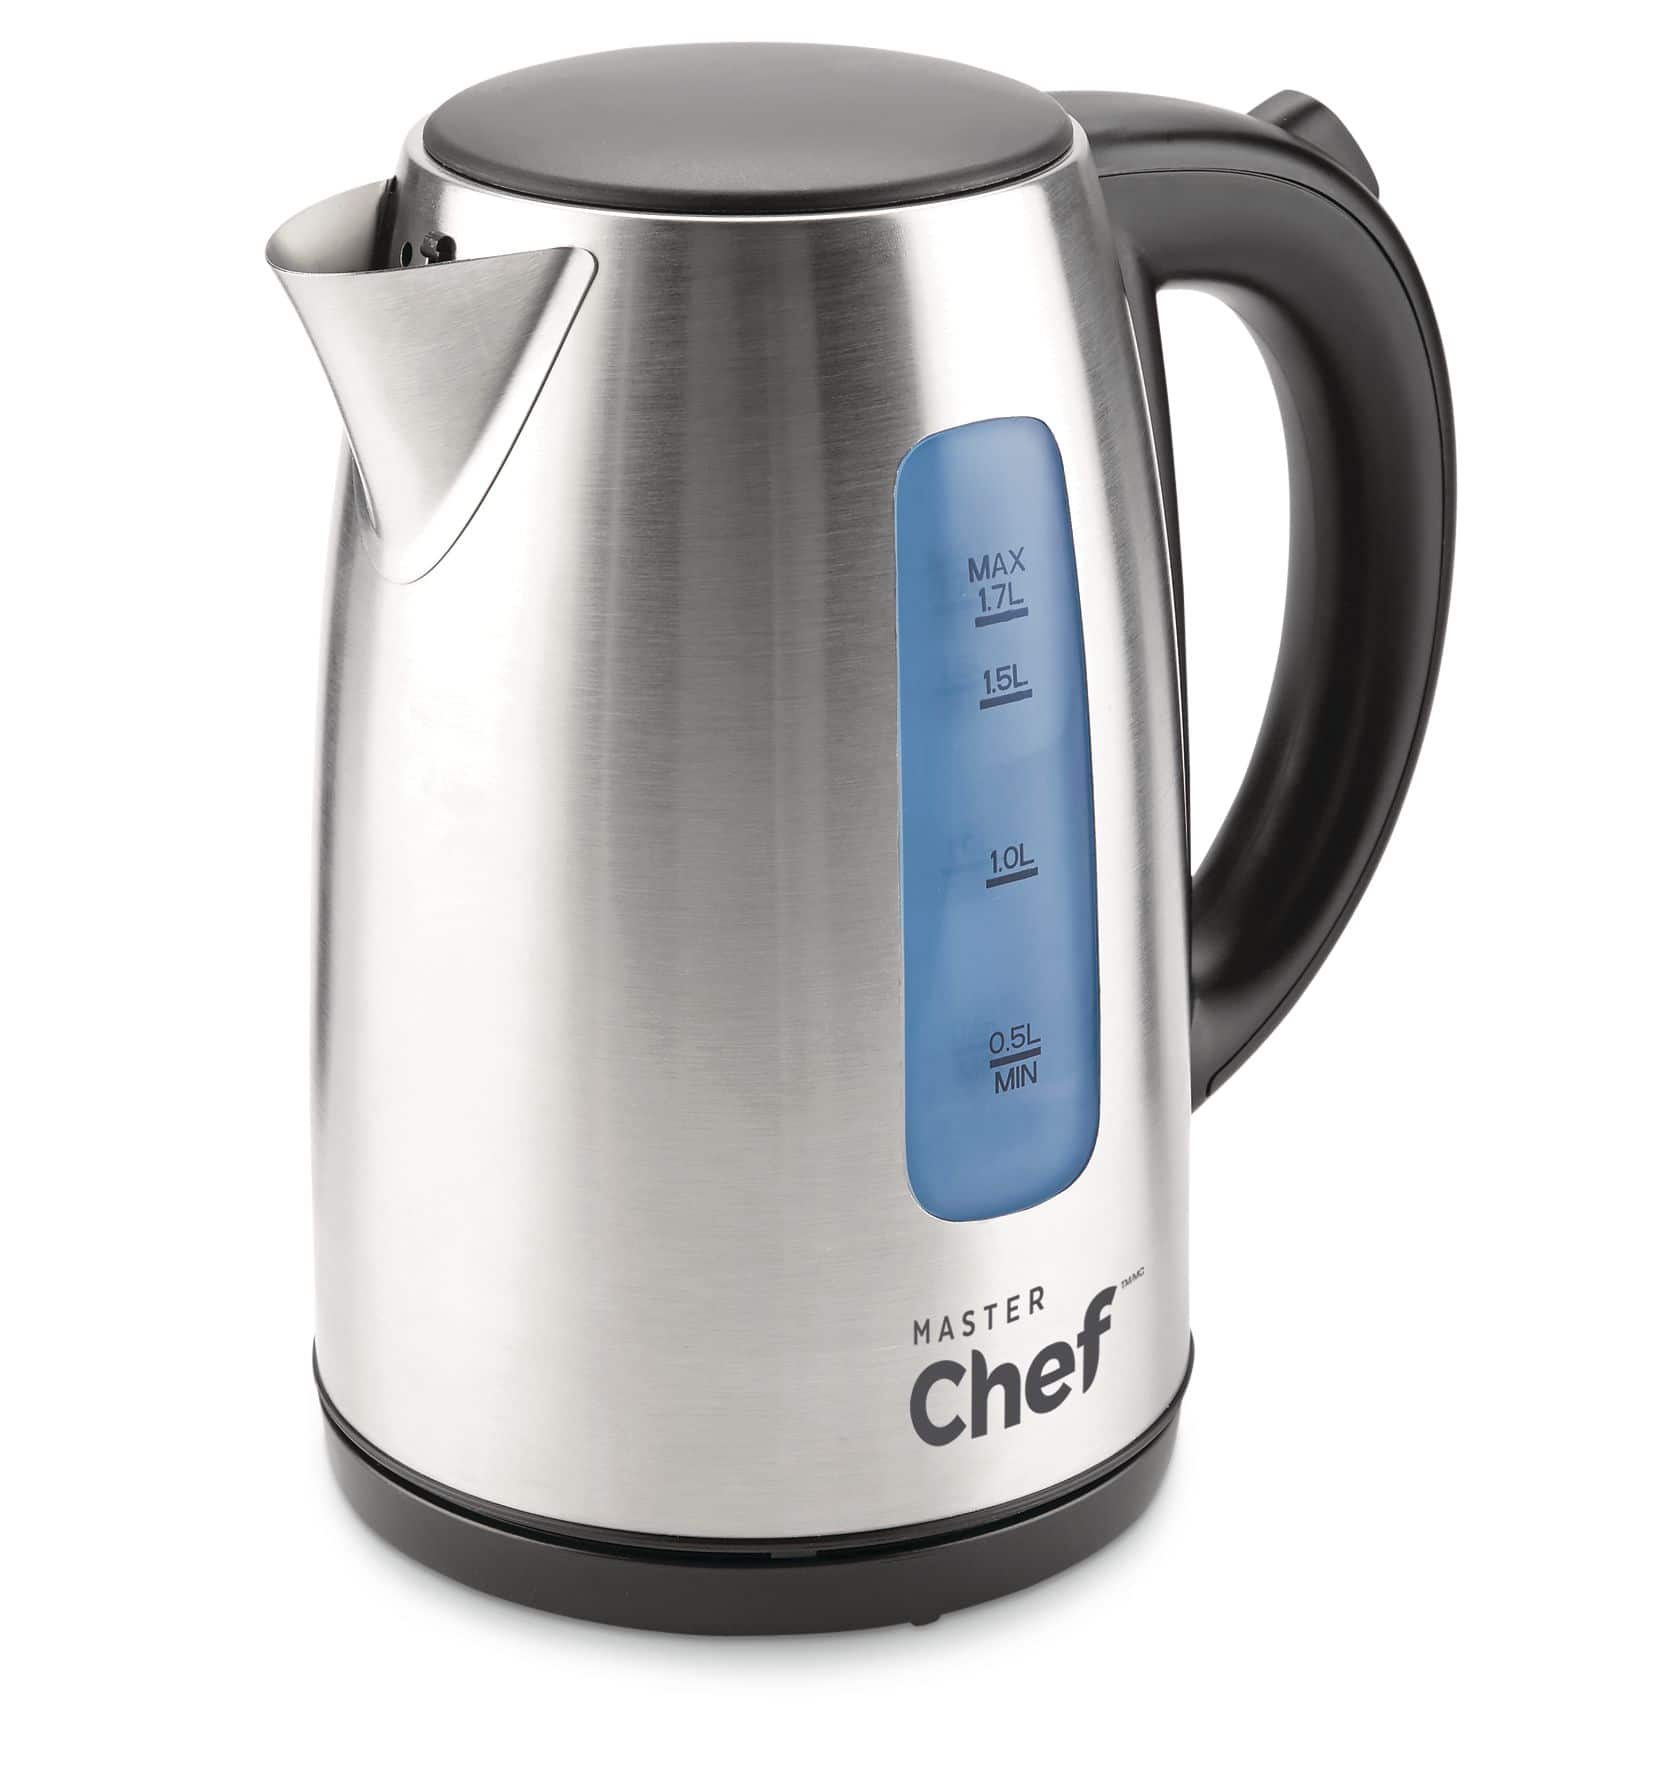 https://media-www.canadiantire.ca/product/living/kitchen/kitchen-appliances/0431321/master-chef-1-7l-stainless-steel-kettle-628659ca-a380-4334-b3ae-5b1382d00146-jpgrendition.jpg